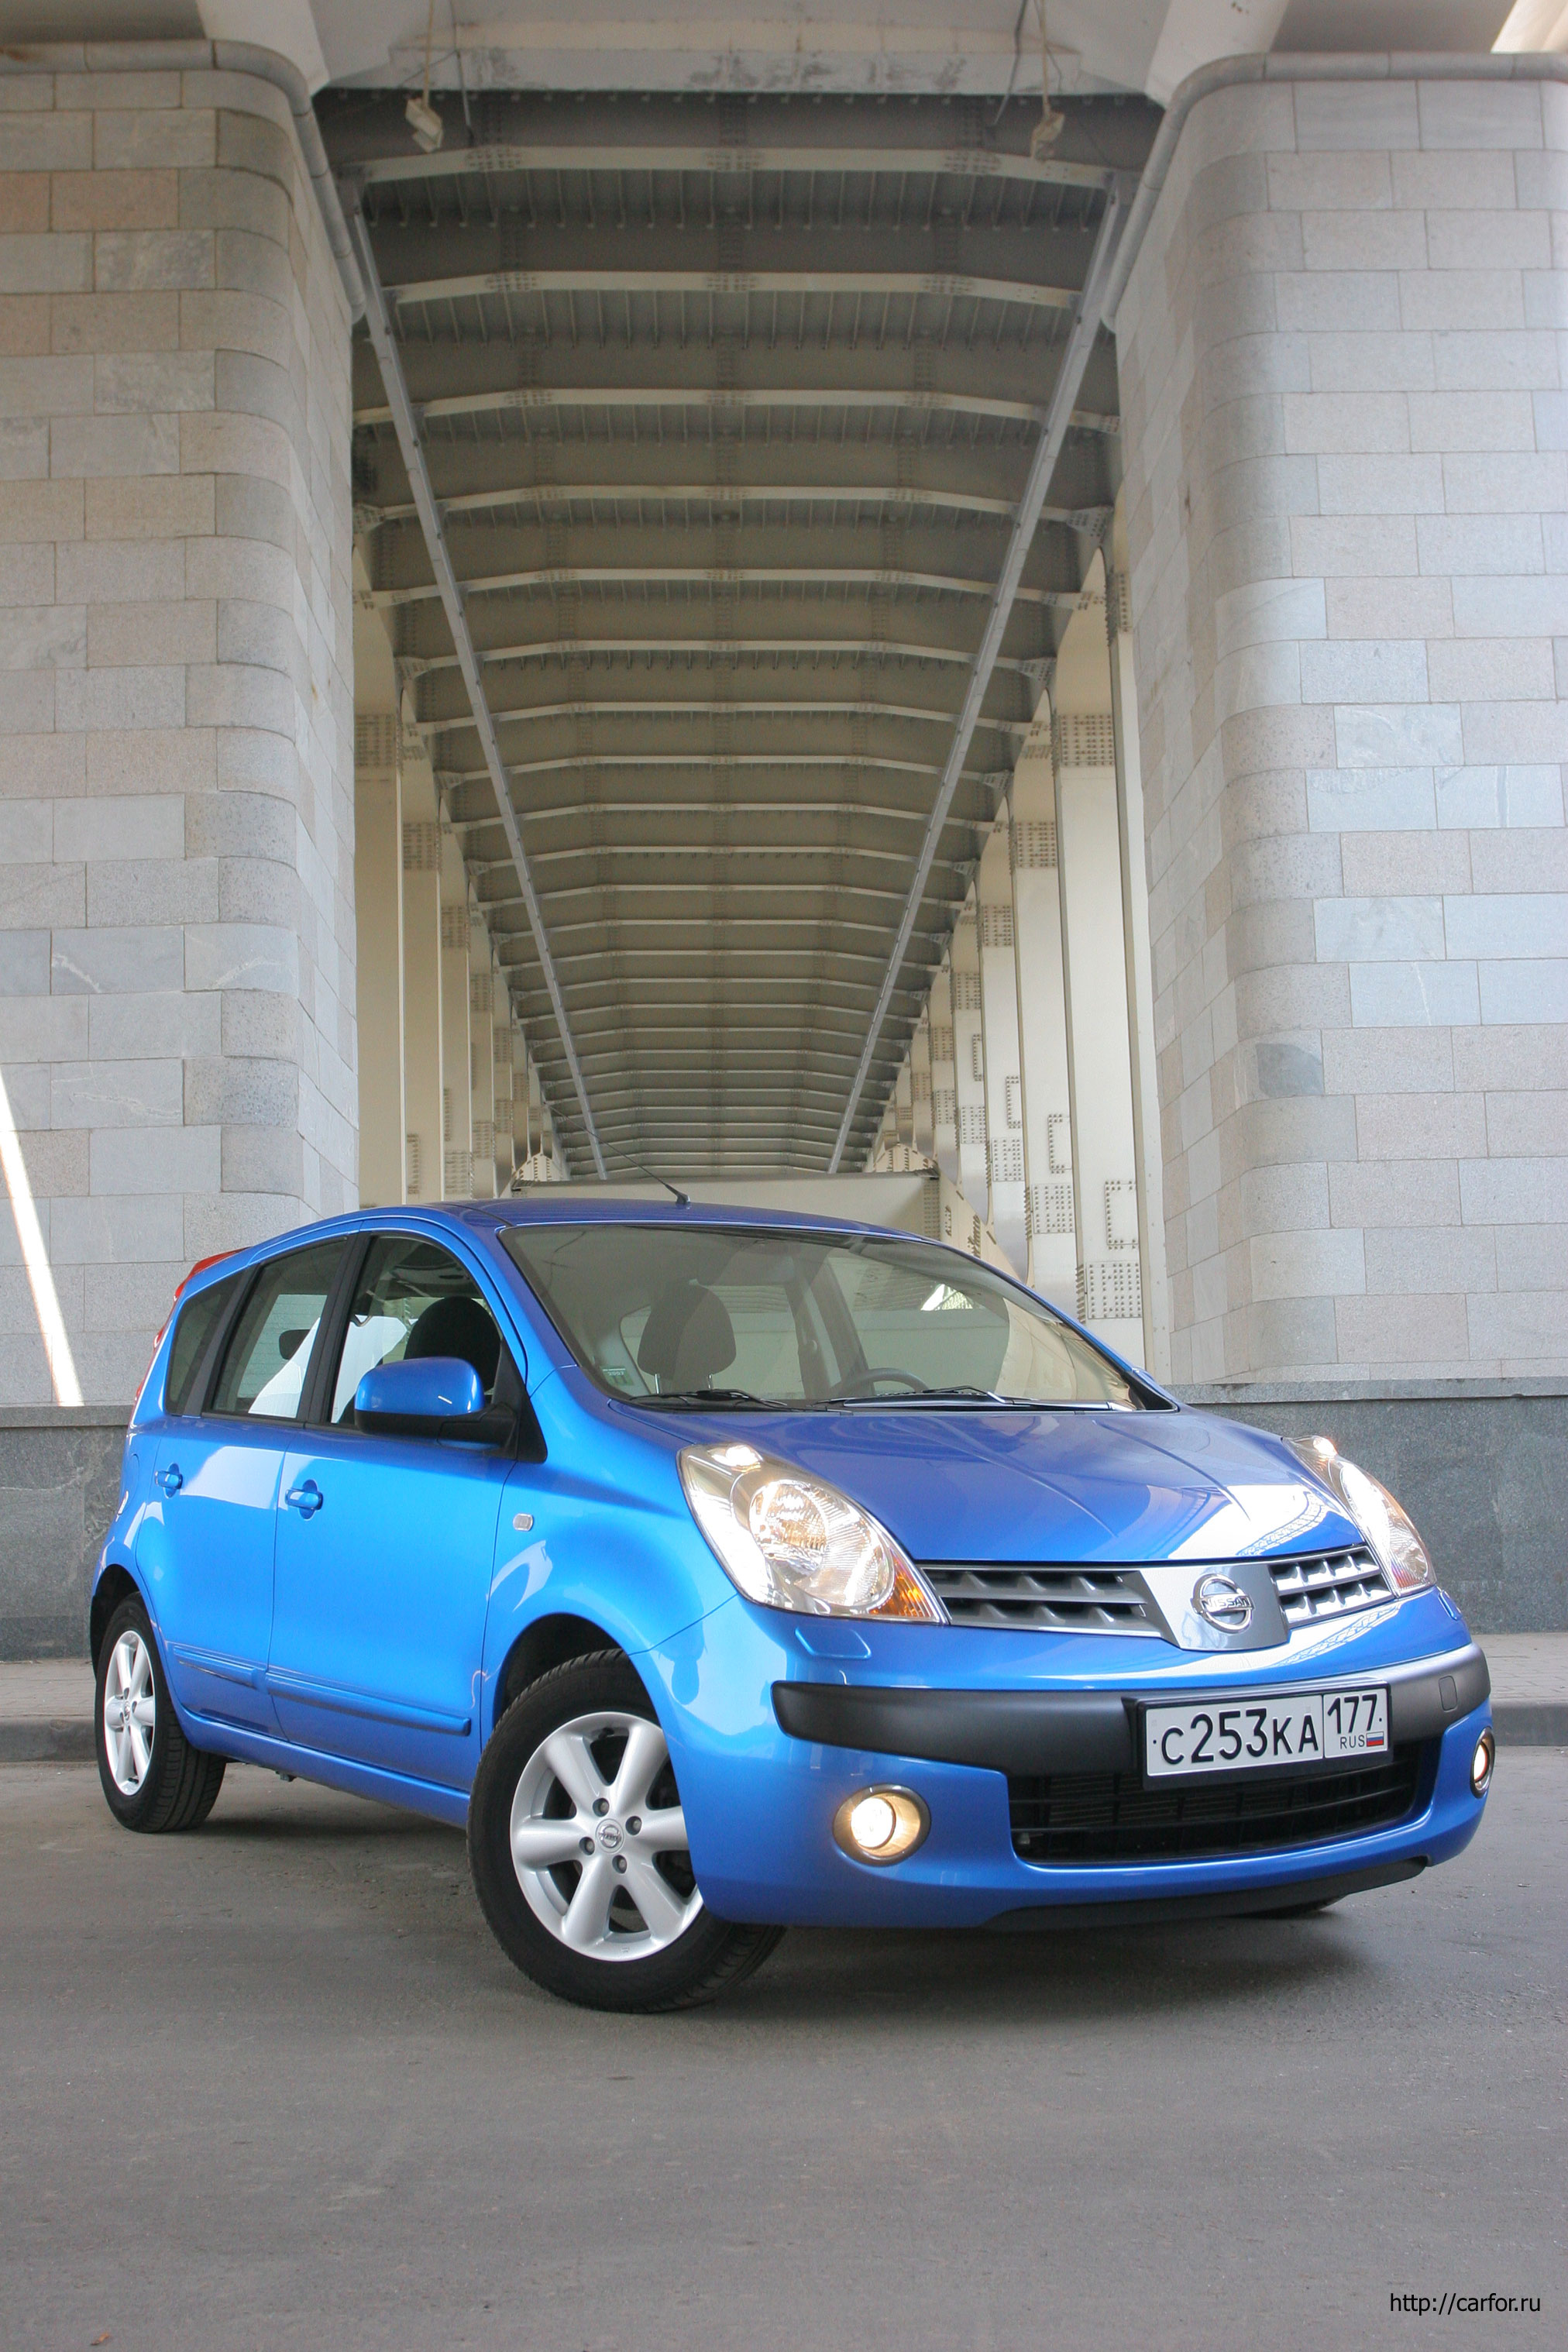 nissan note